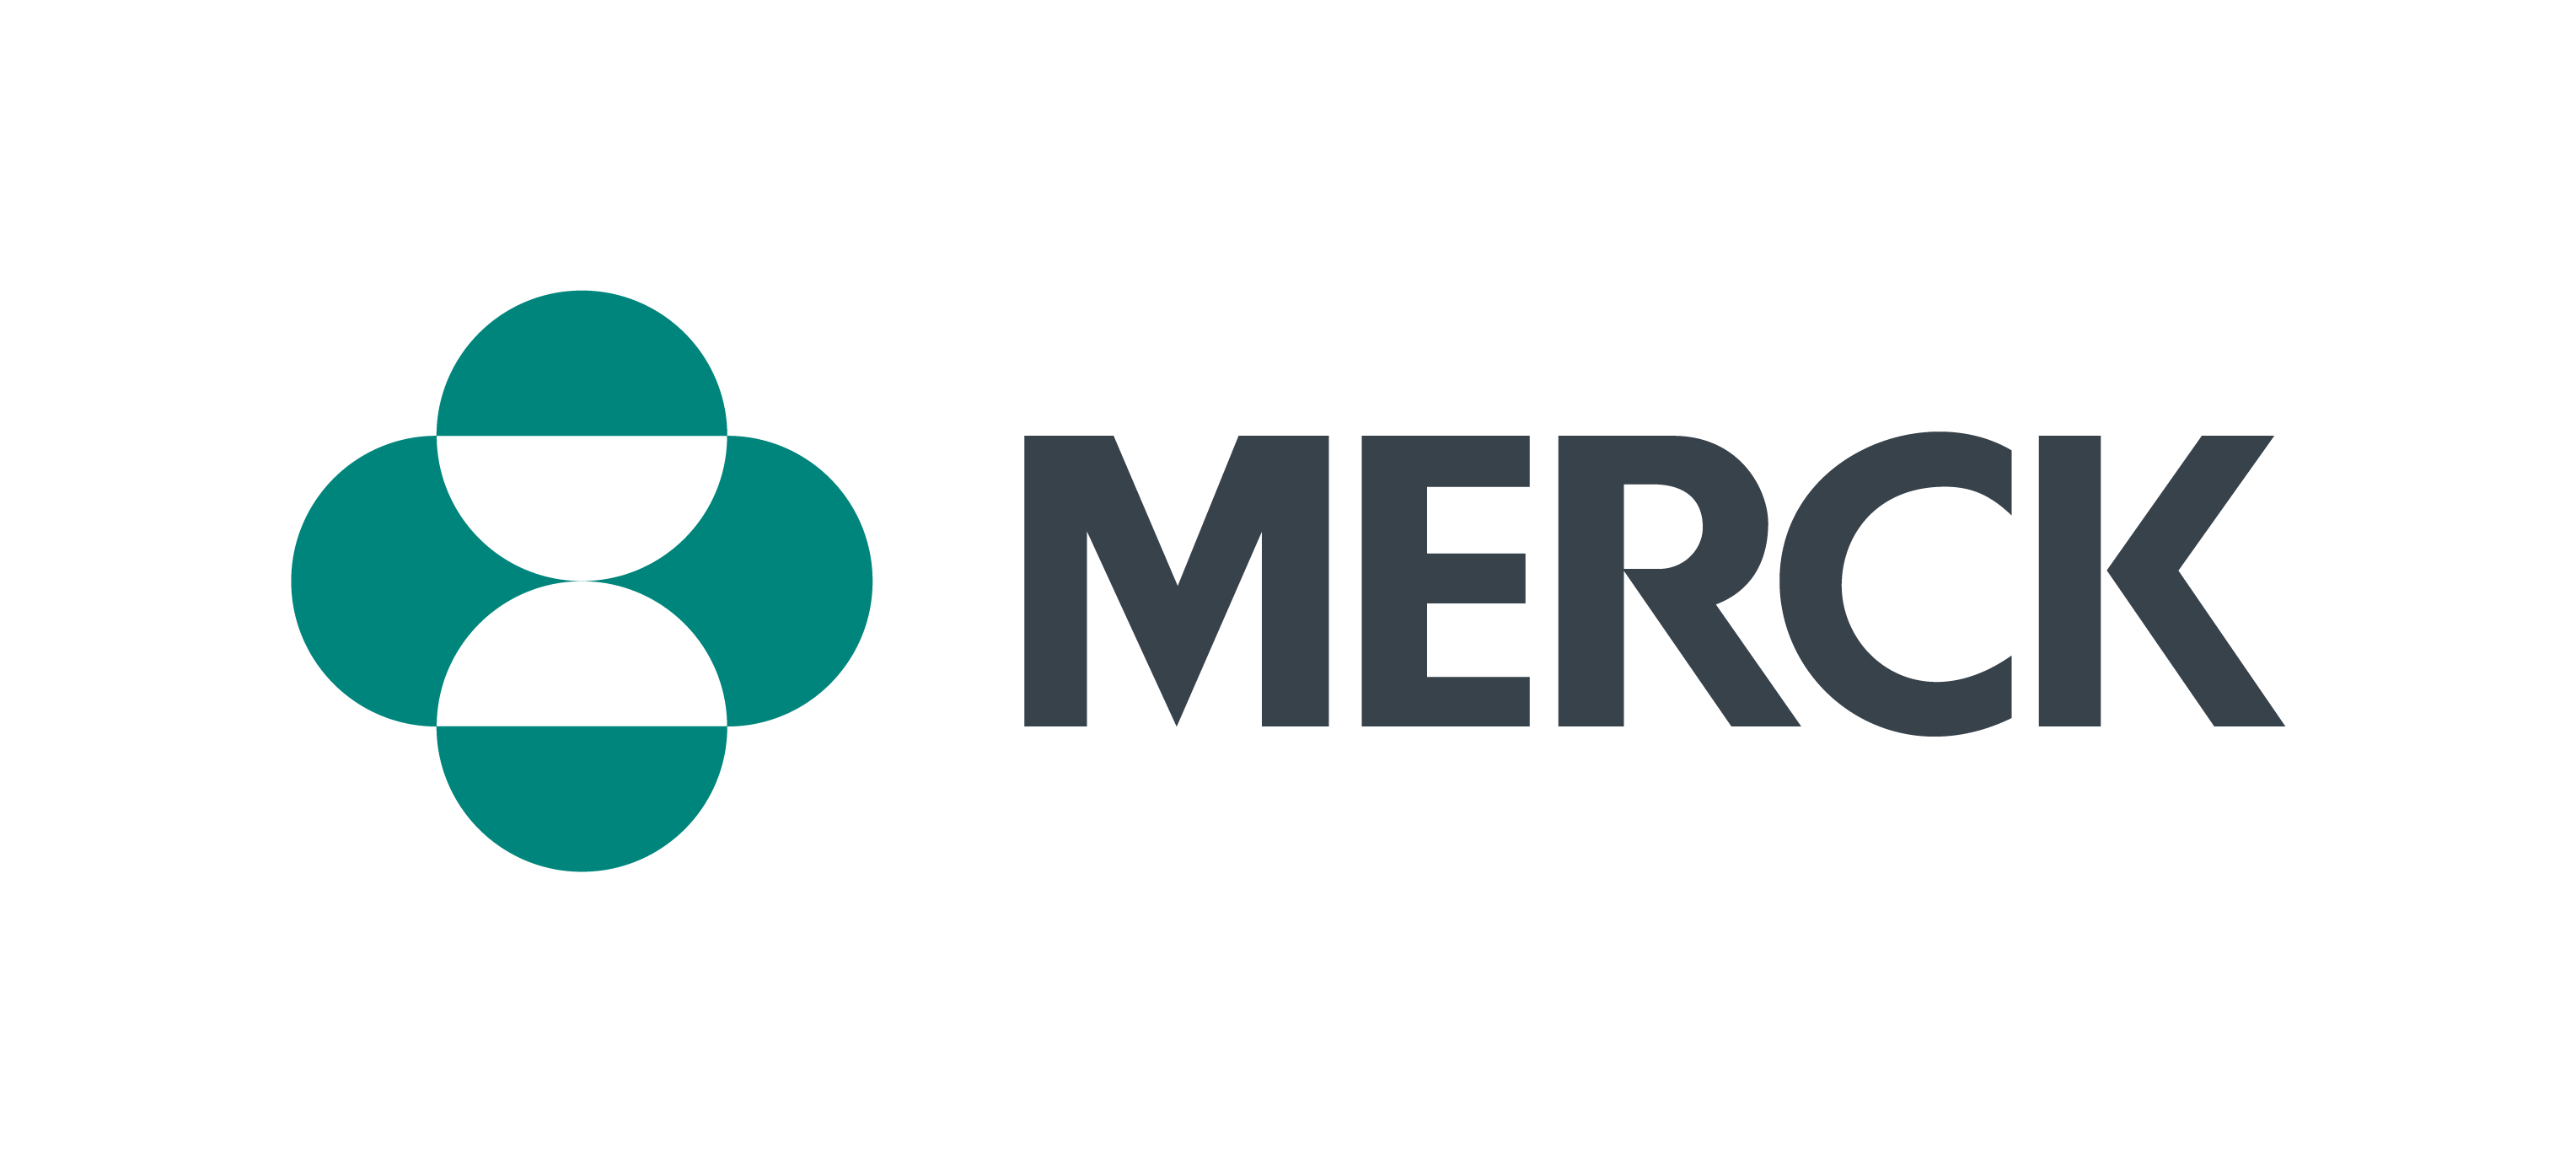 Merck and Ridgeback Biotherapeutics Provide Update on Results from MOVe-OUT Study of Molnupiravir, an Investigational Oral Antiviral Medicine, in At Risk Adults With Mild-to-Moderate COVID-19